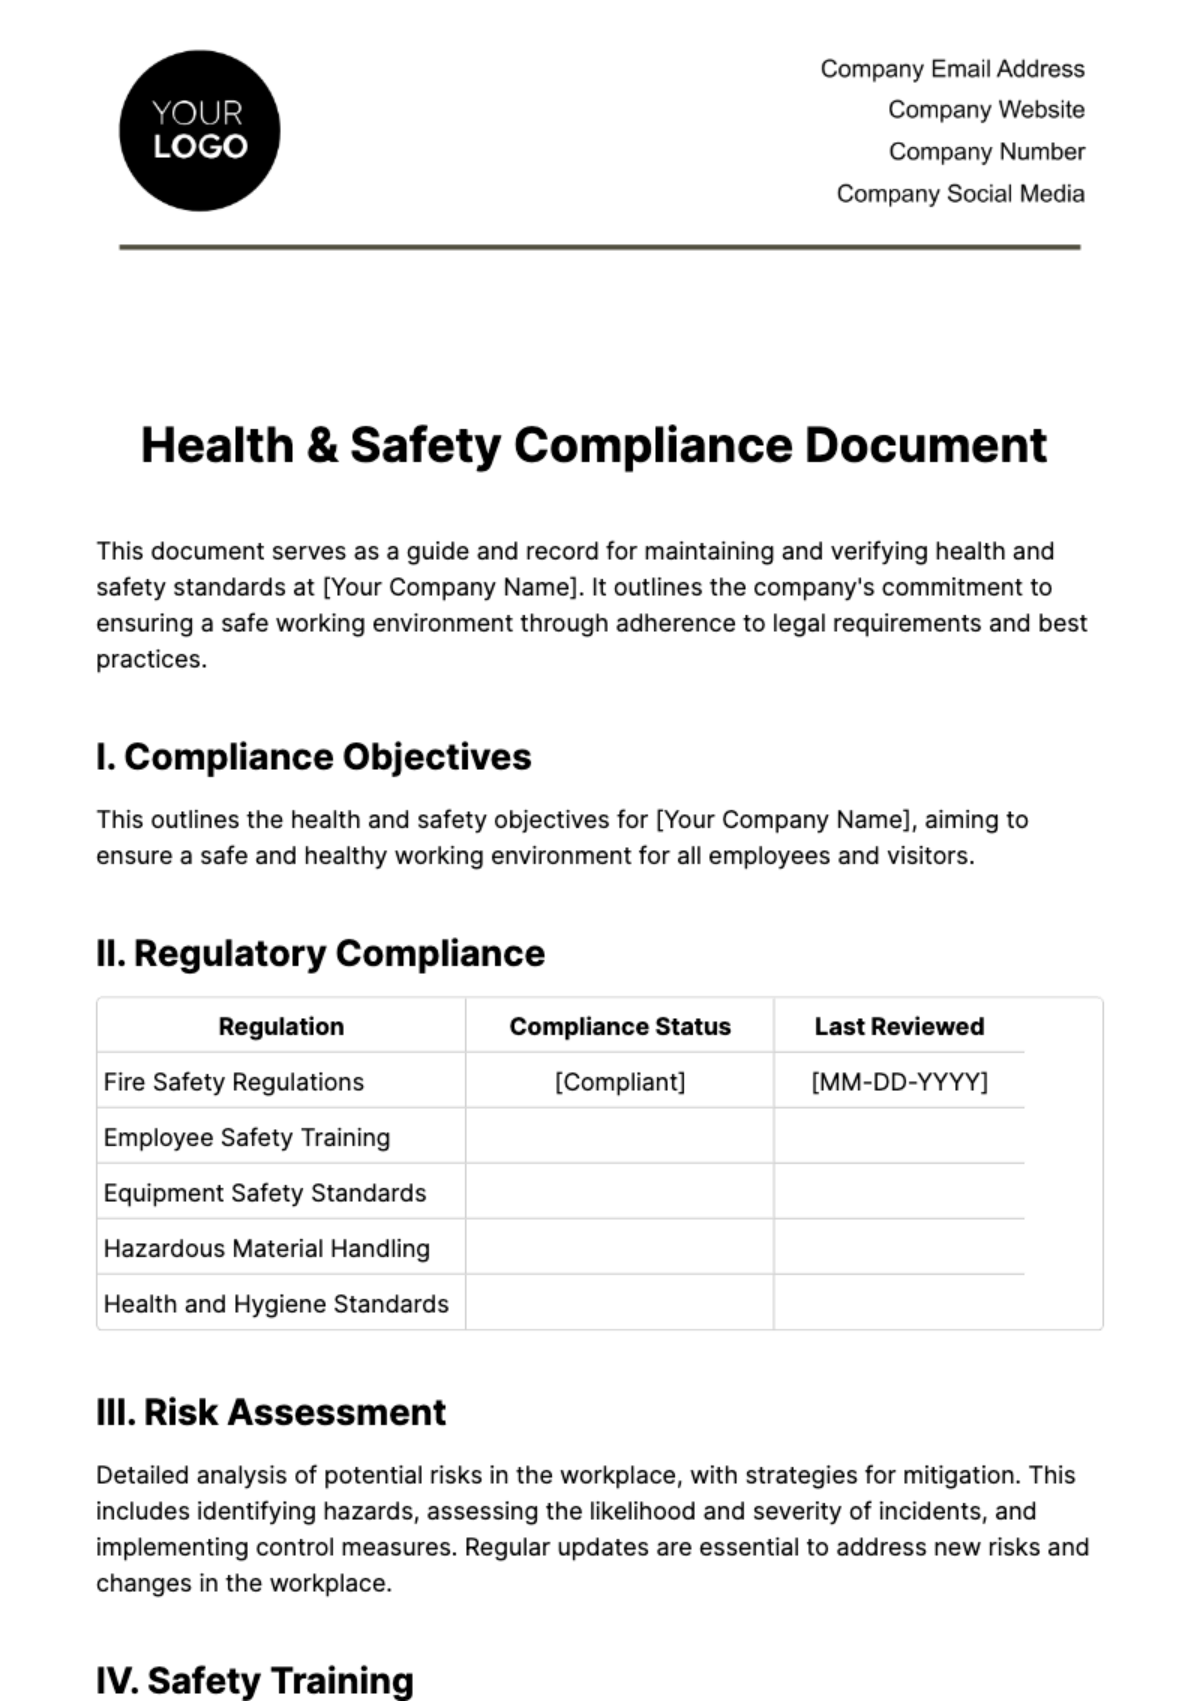 Free Health & Safety Compliance Document Template